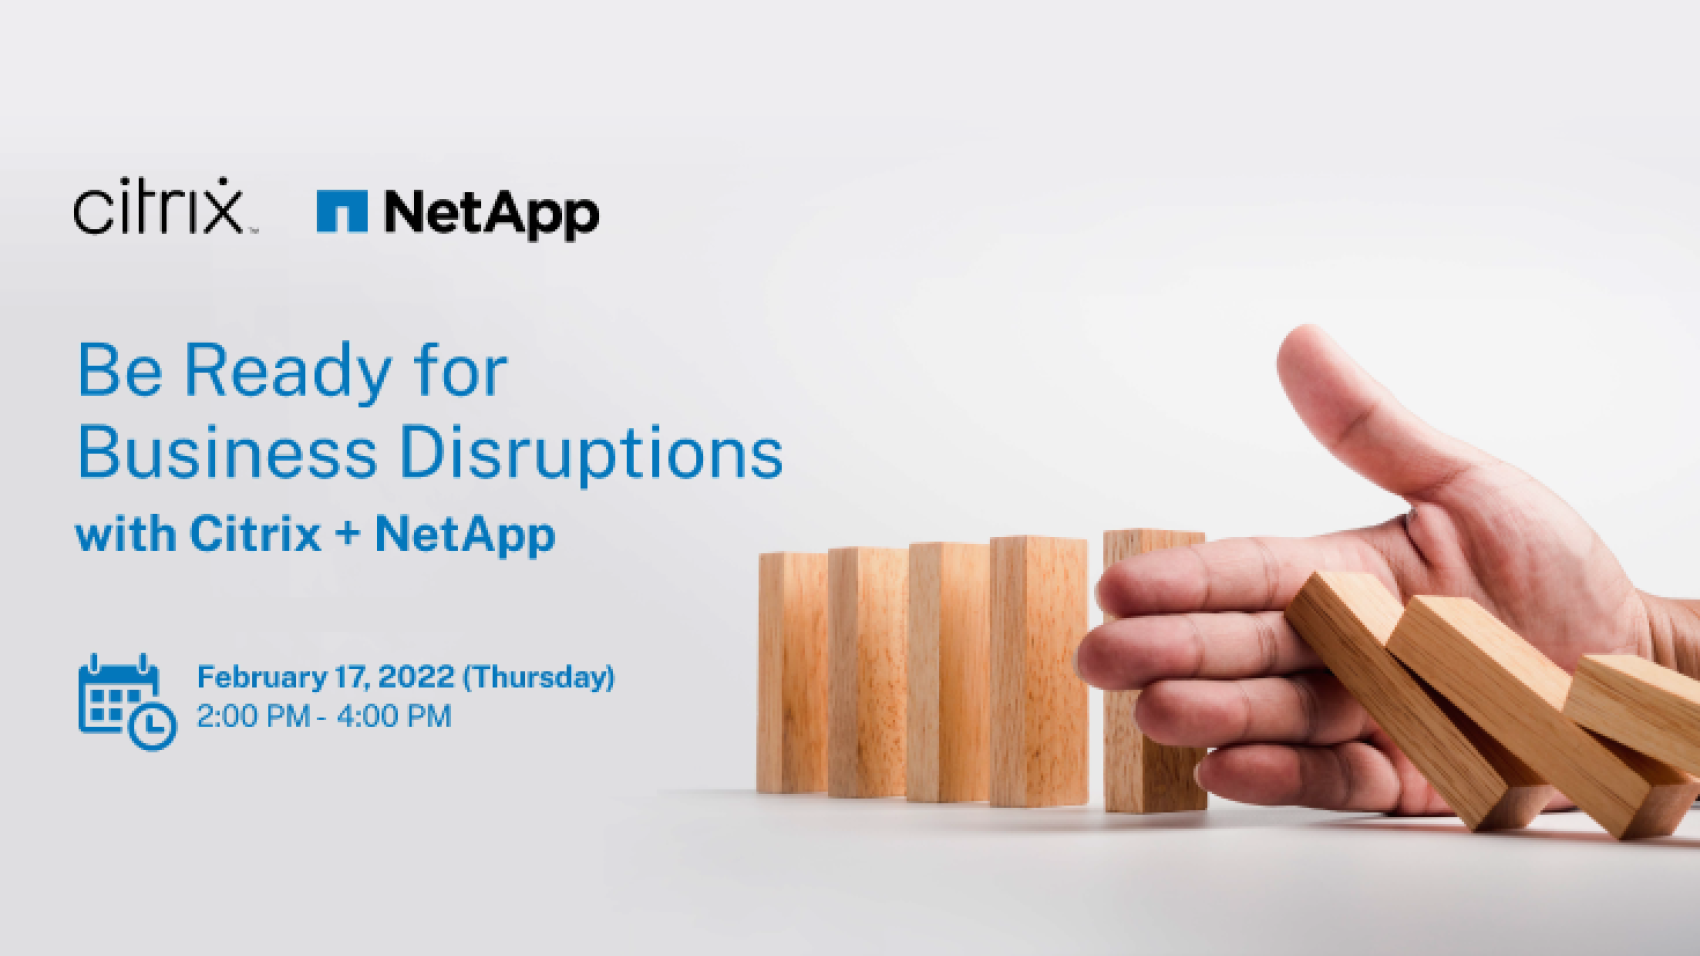 Be Ready for Business Disruptions with Citrix and NetApp